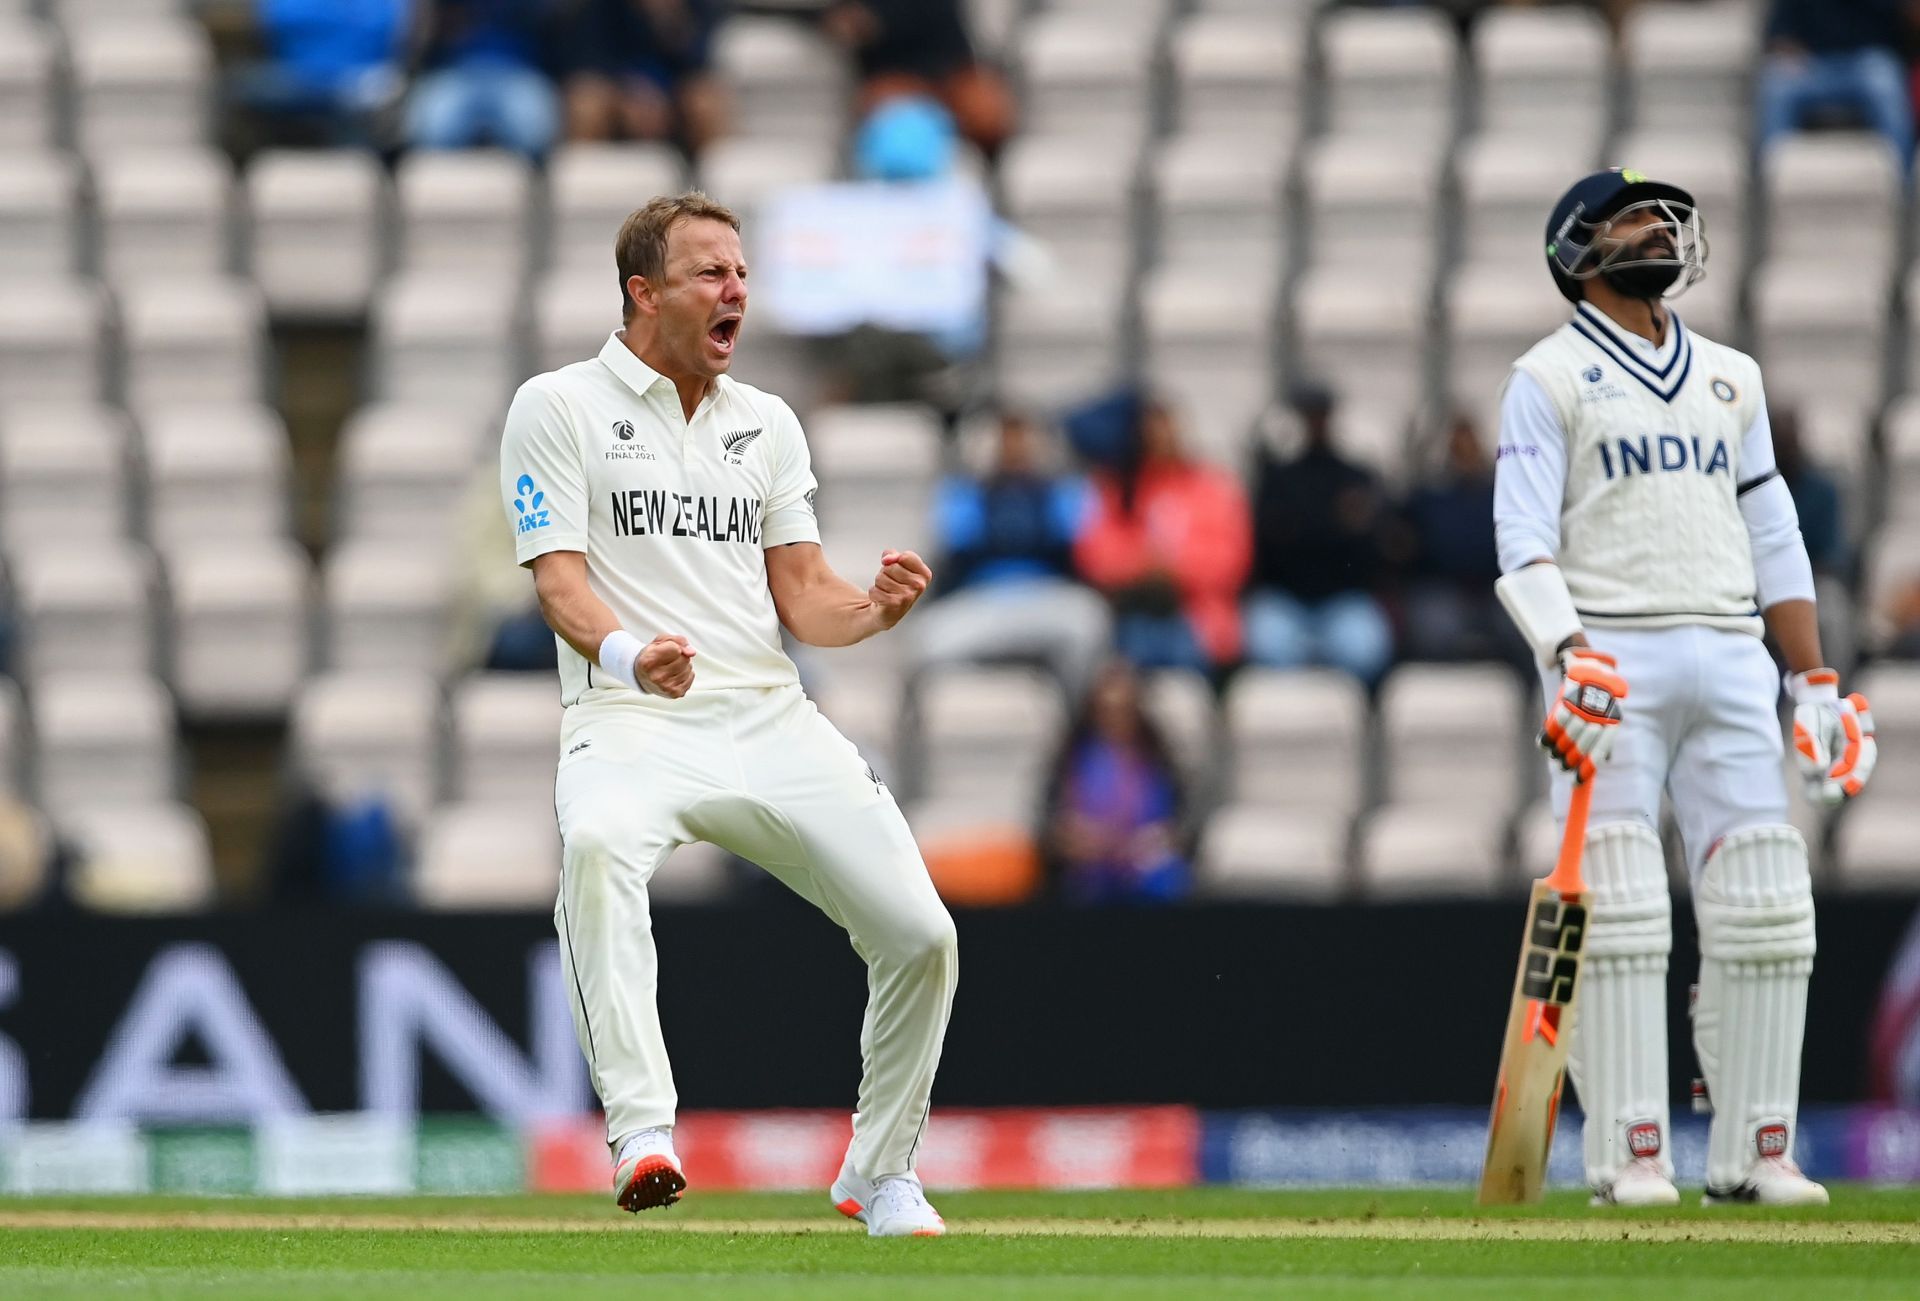 New Zealand pacer Neil Wagner celebrates a wicket during the 2021 ICC World Test Championship Final.